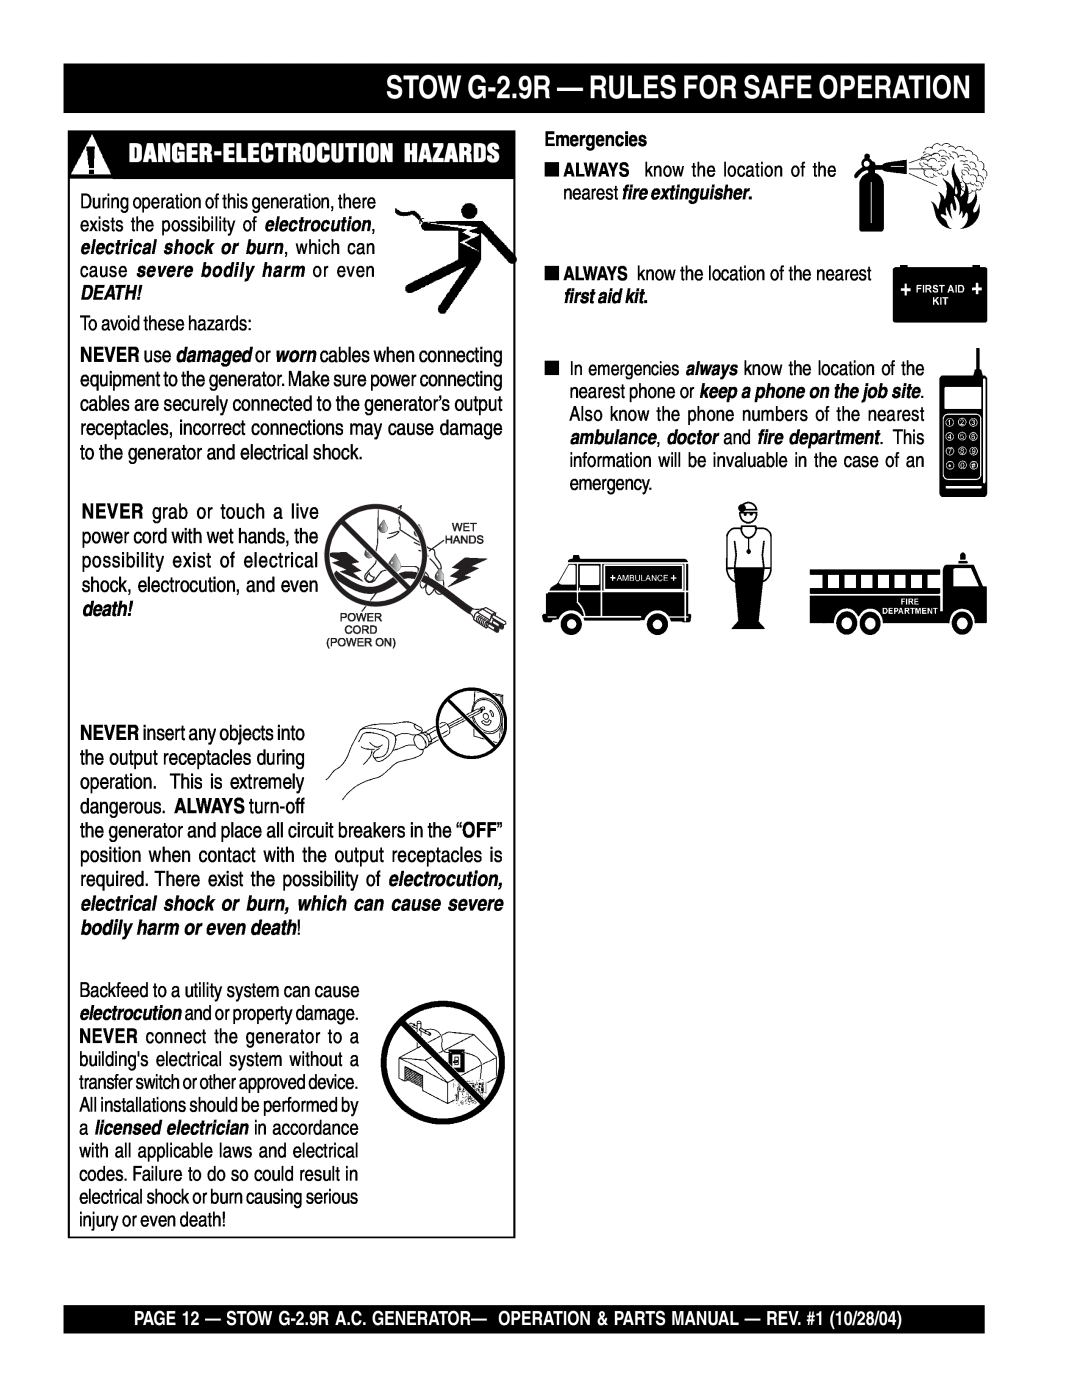 Stow manual STOW G-2.9R - RULES FOR SAFE OPERATION, Danger-Electrocution Hazards, Death, Emergencies 